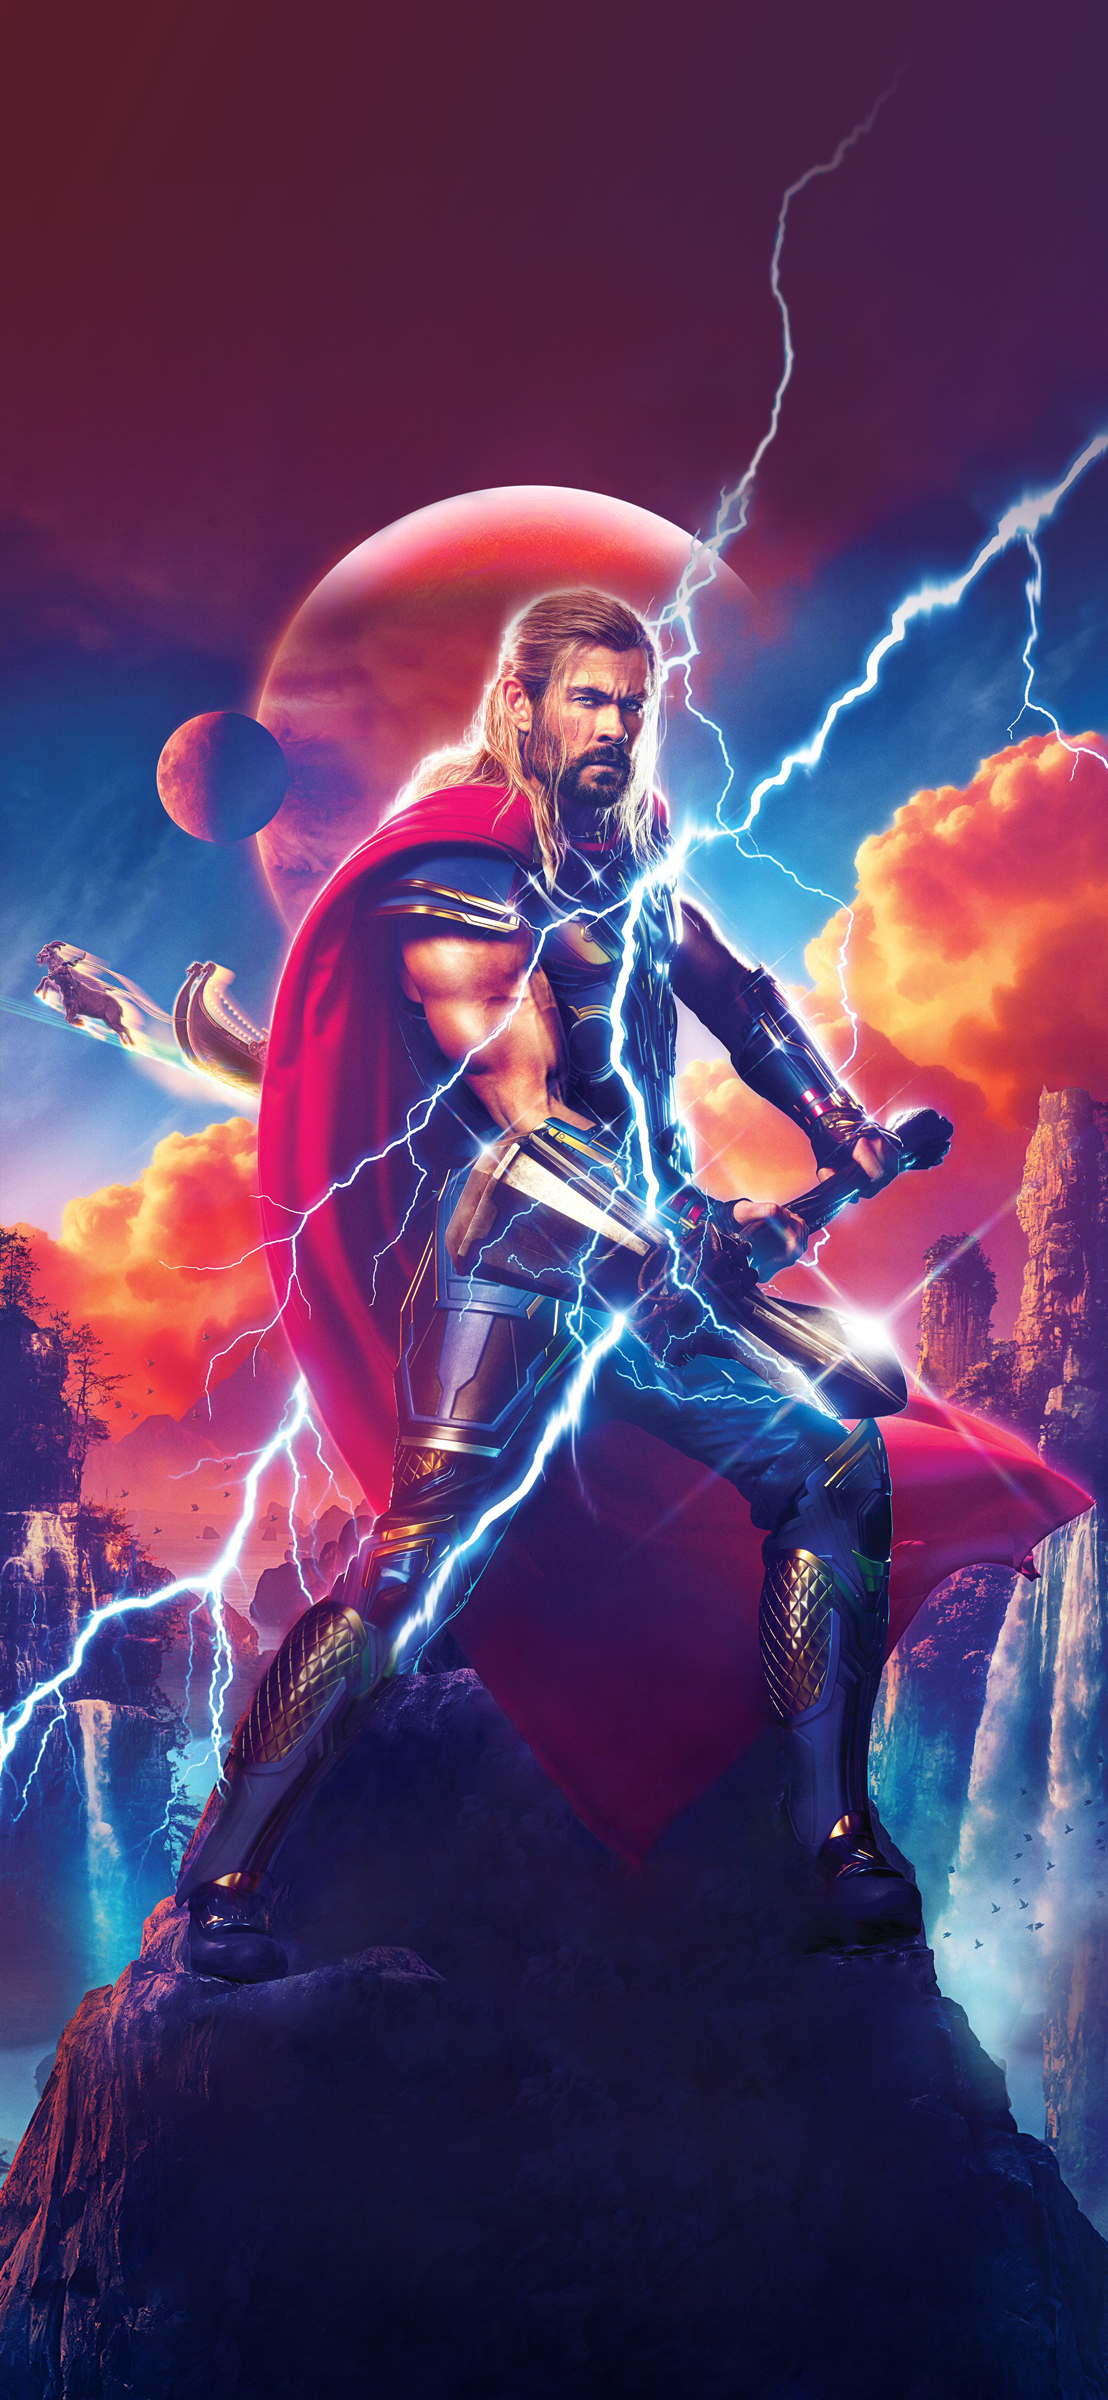 Thor Love and Thunder Review A Bit Shaky Mostly Successful